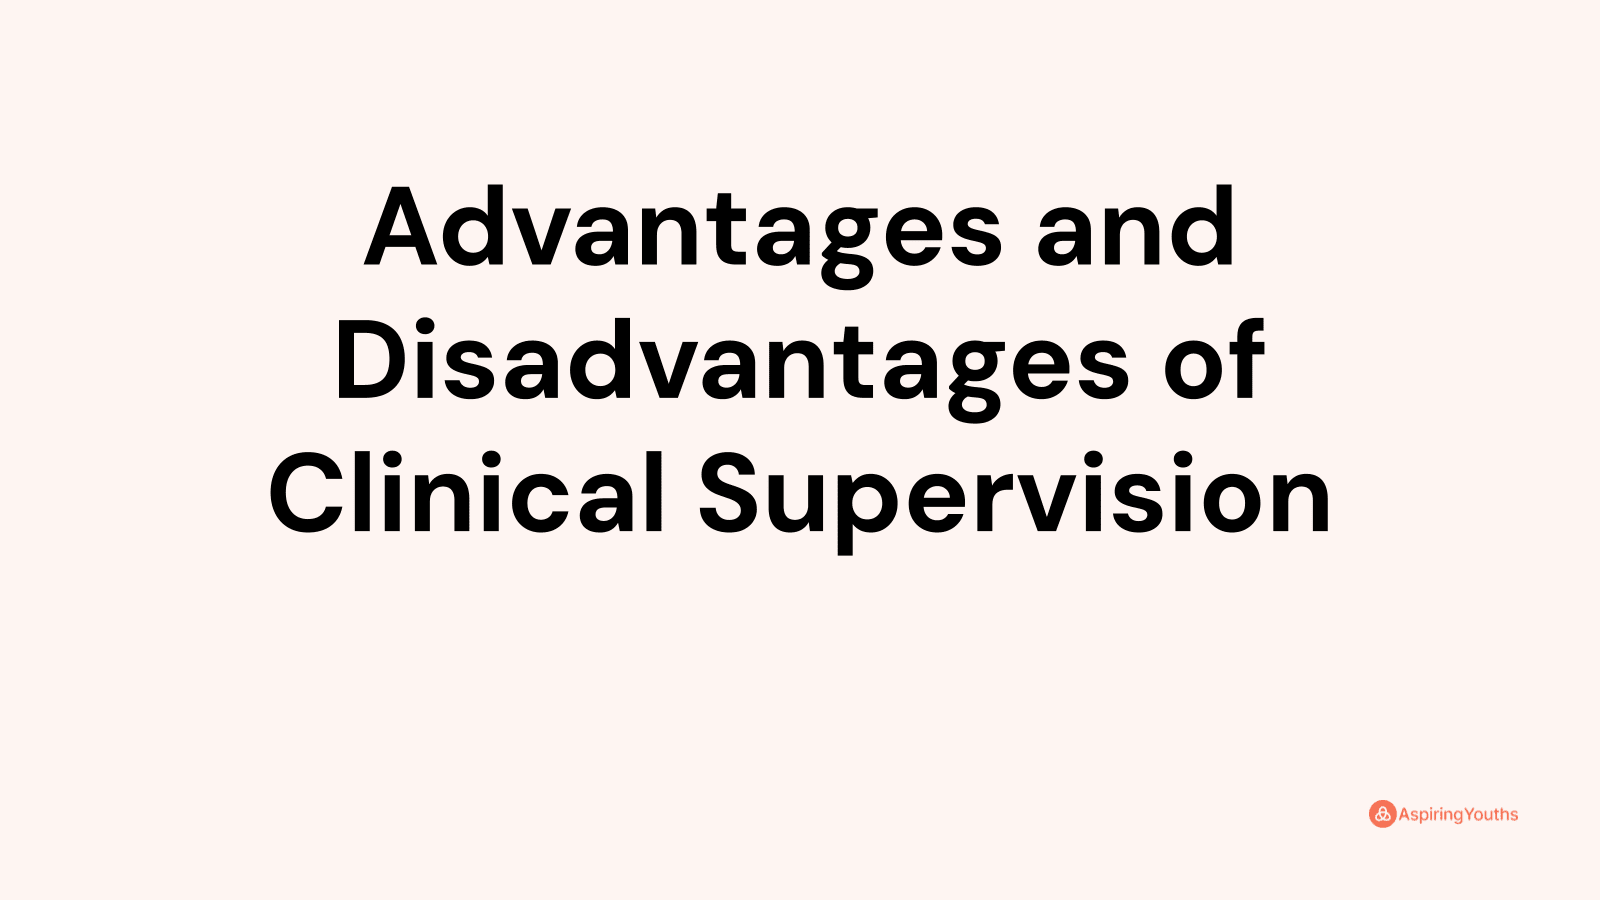 Advantages and disadvantages of Clinical Supervision